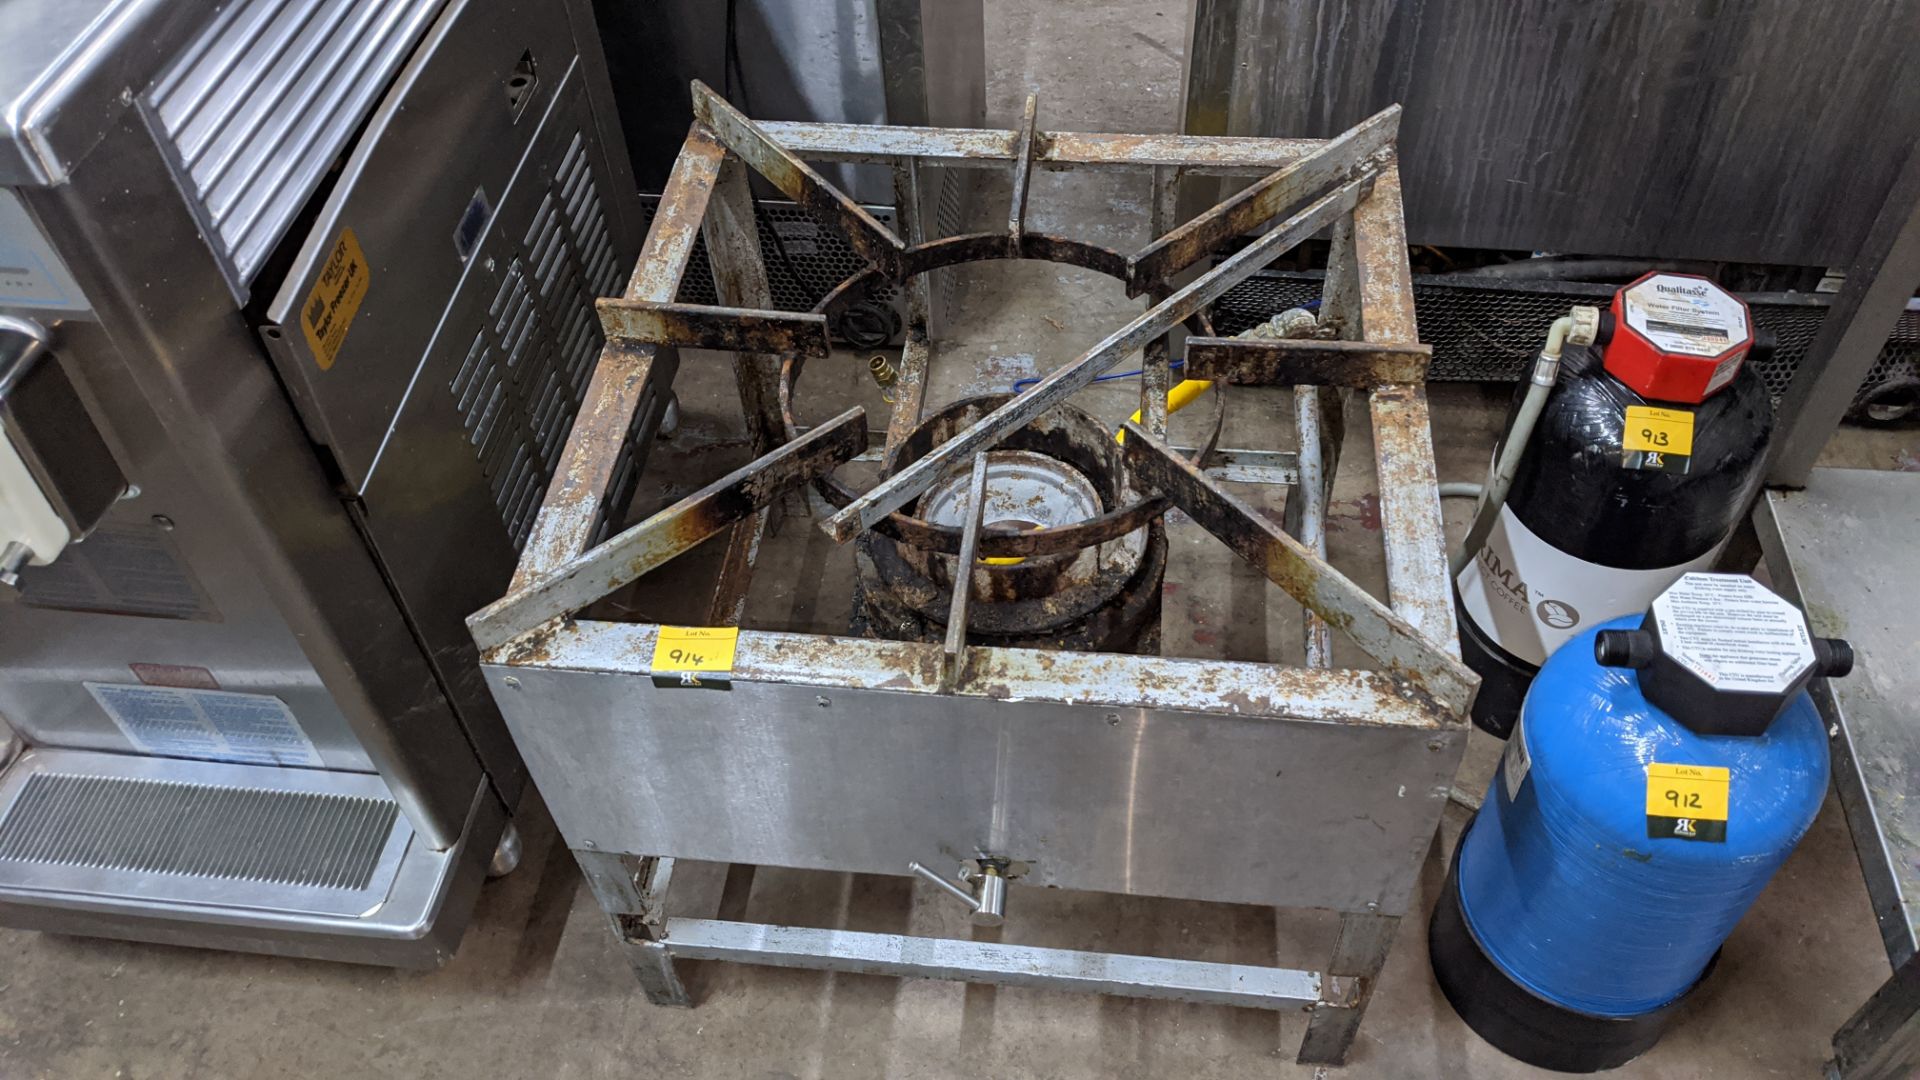 Large single gas burner. IMPORTANT: Please remember goods successfully bid upon must be paid for and